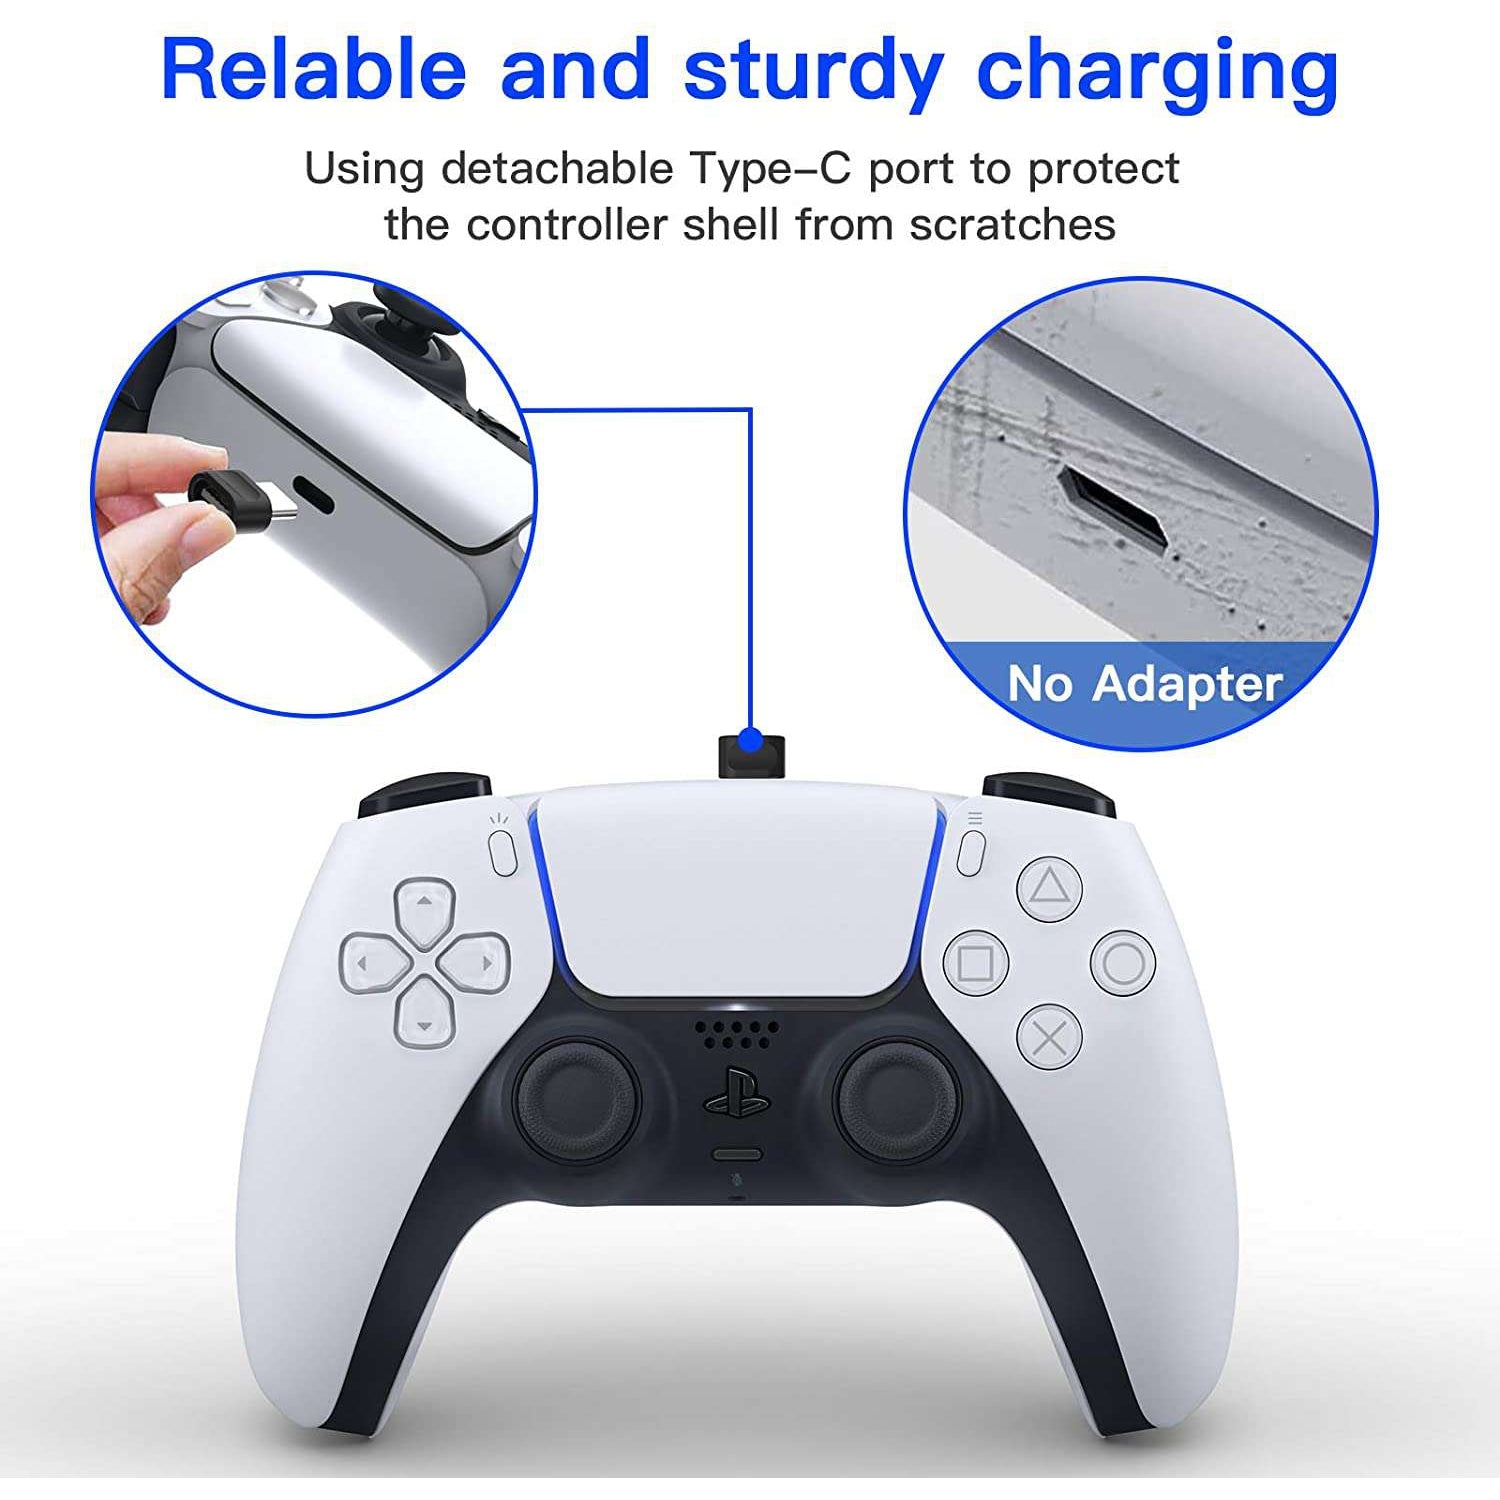 Removable Type-C adapter safeguards controller housing against scratches.